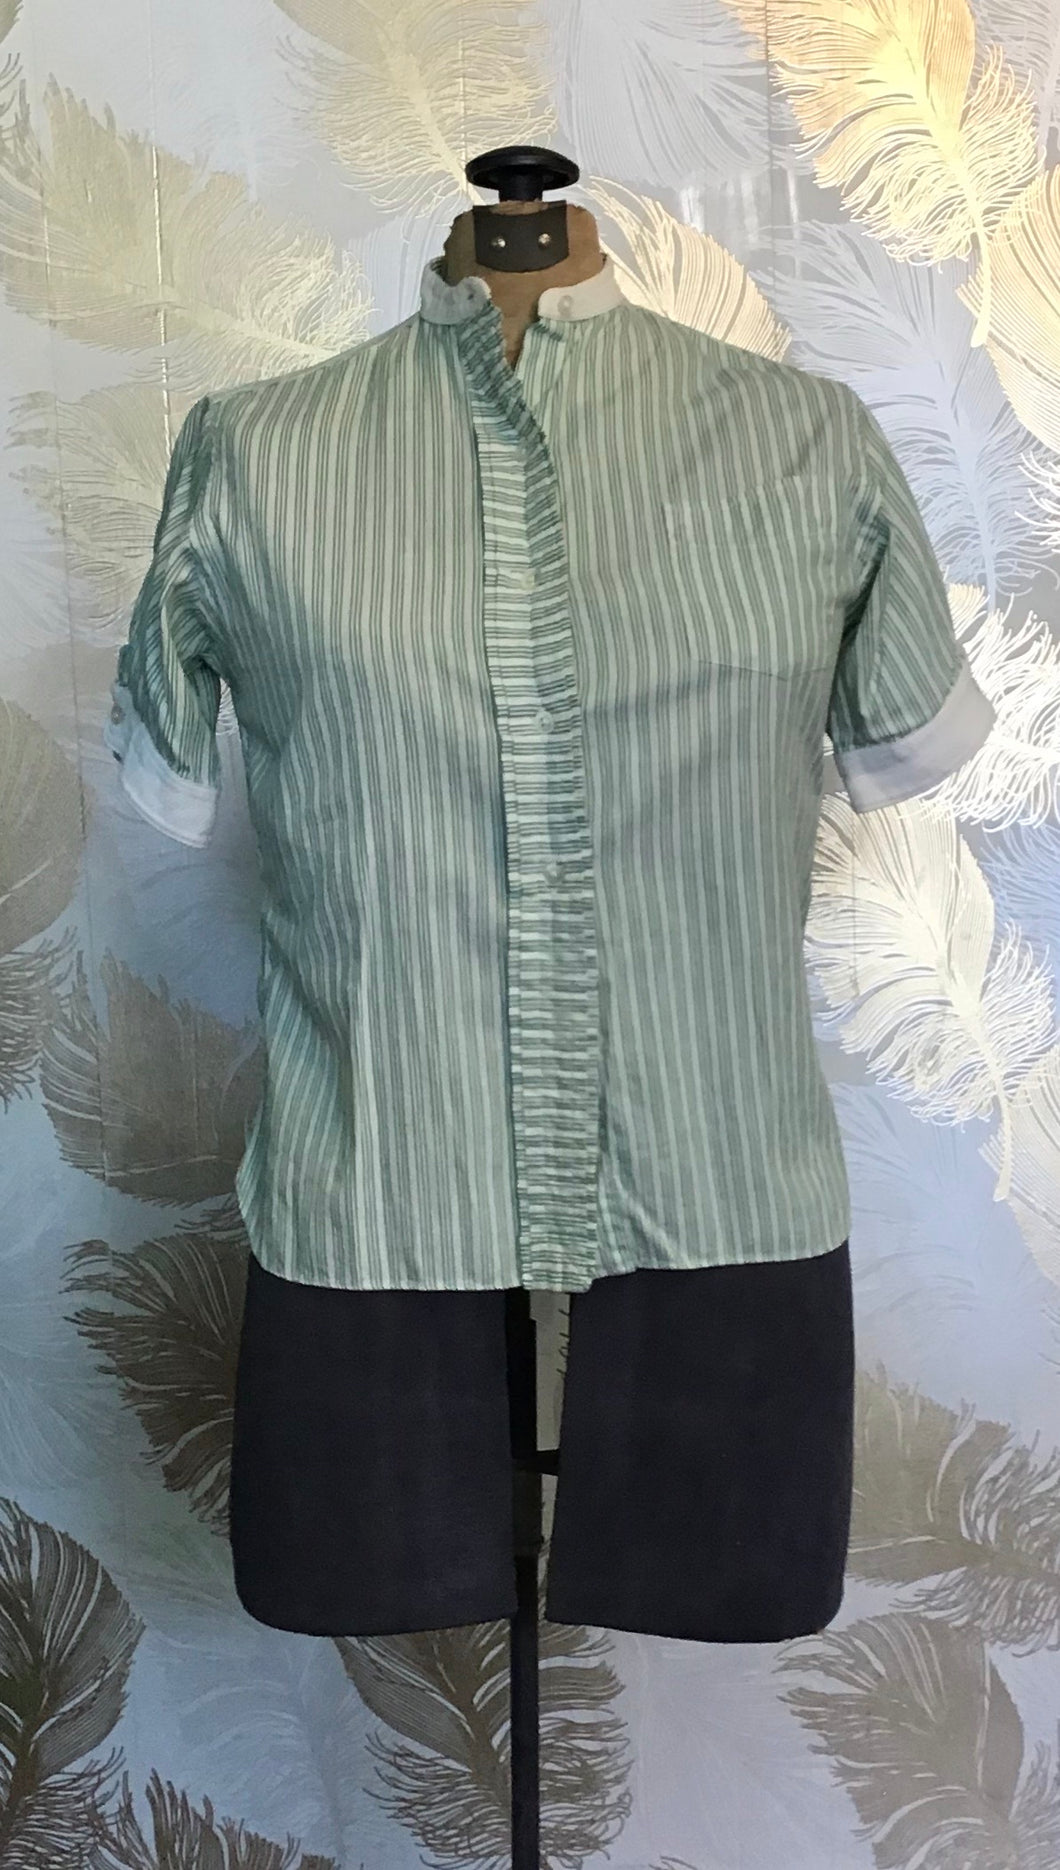 Green and White Stripe Blouse